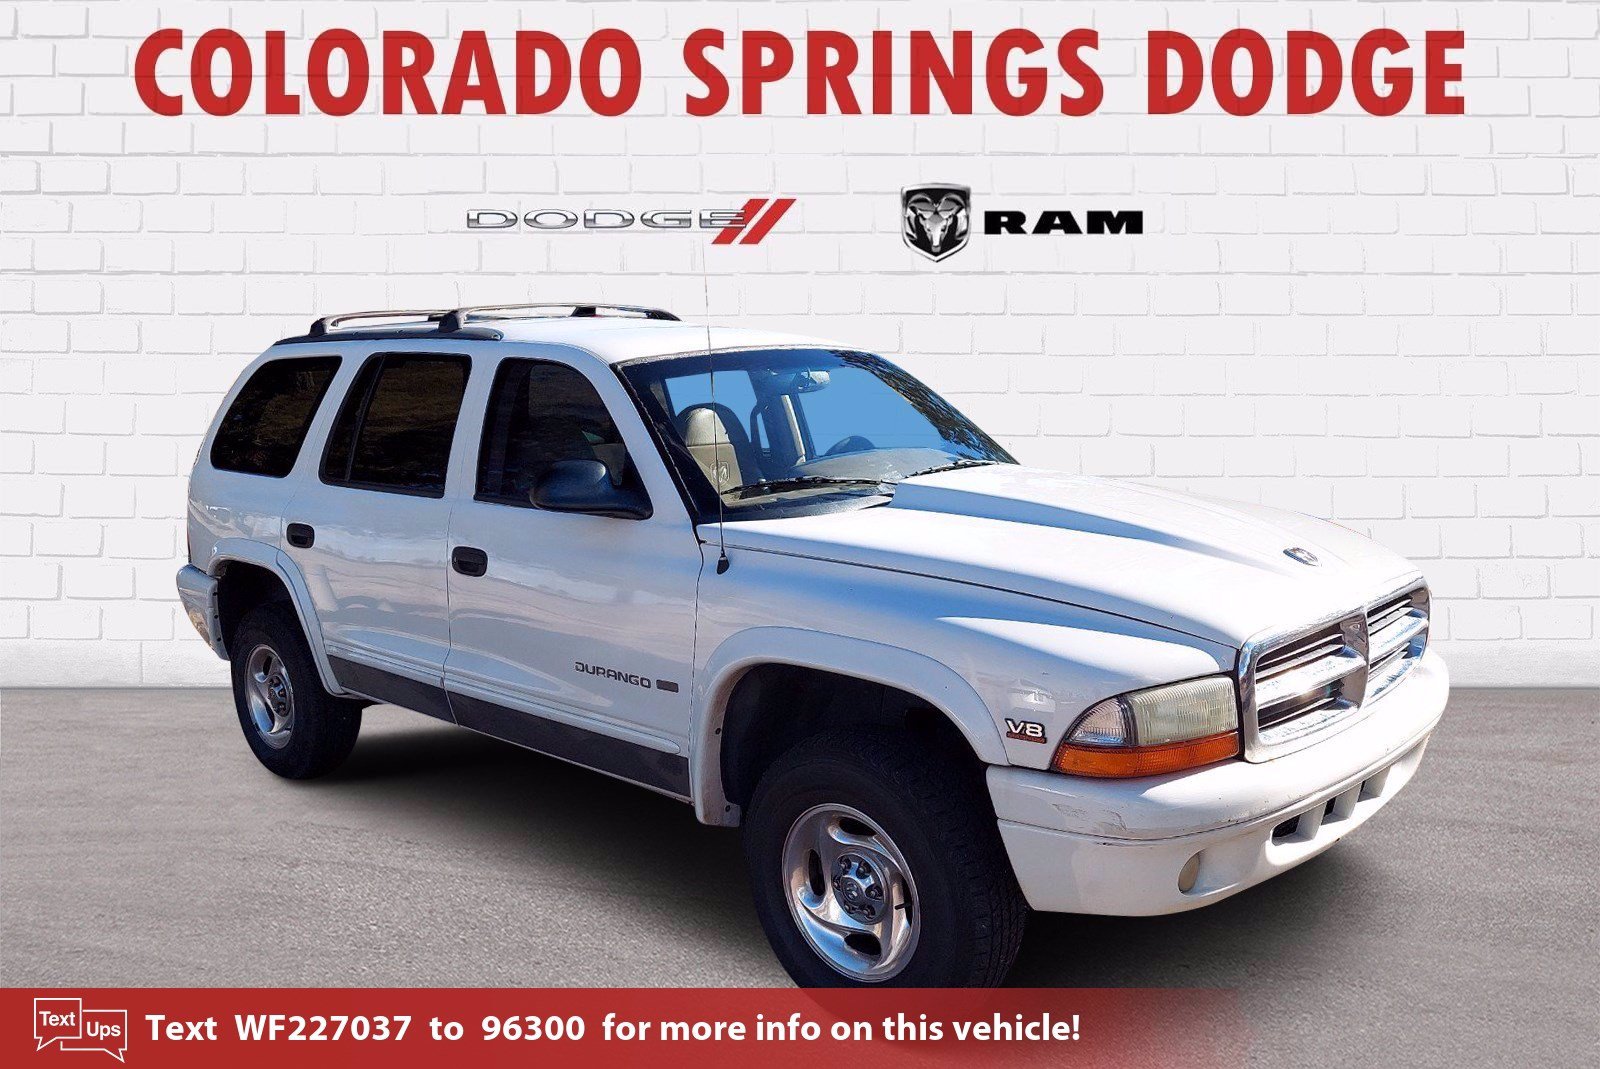 Used 1998 Dodge Durango 4dr 4WD For Sale Near Fountain & Fort Carson | VIN:  1B4HS28Z7WF227037